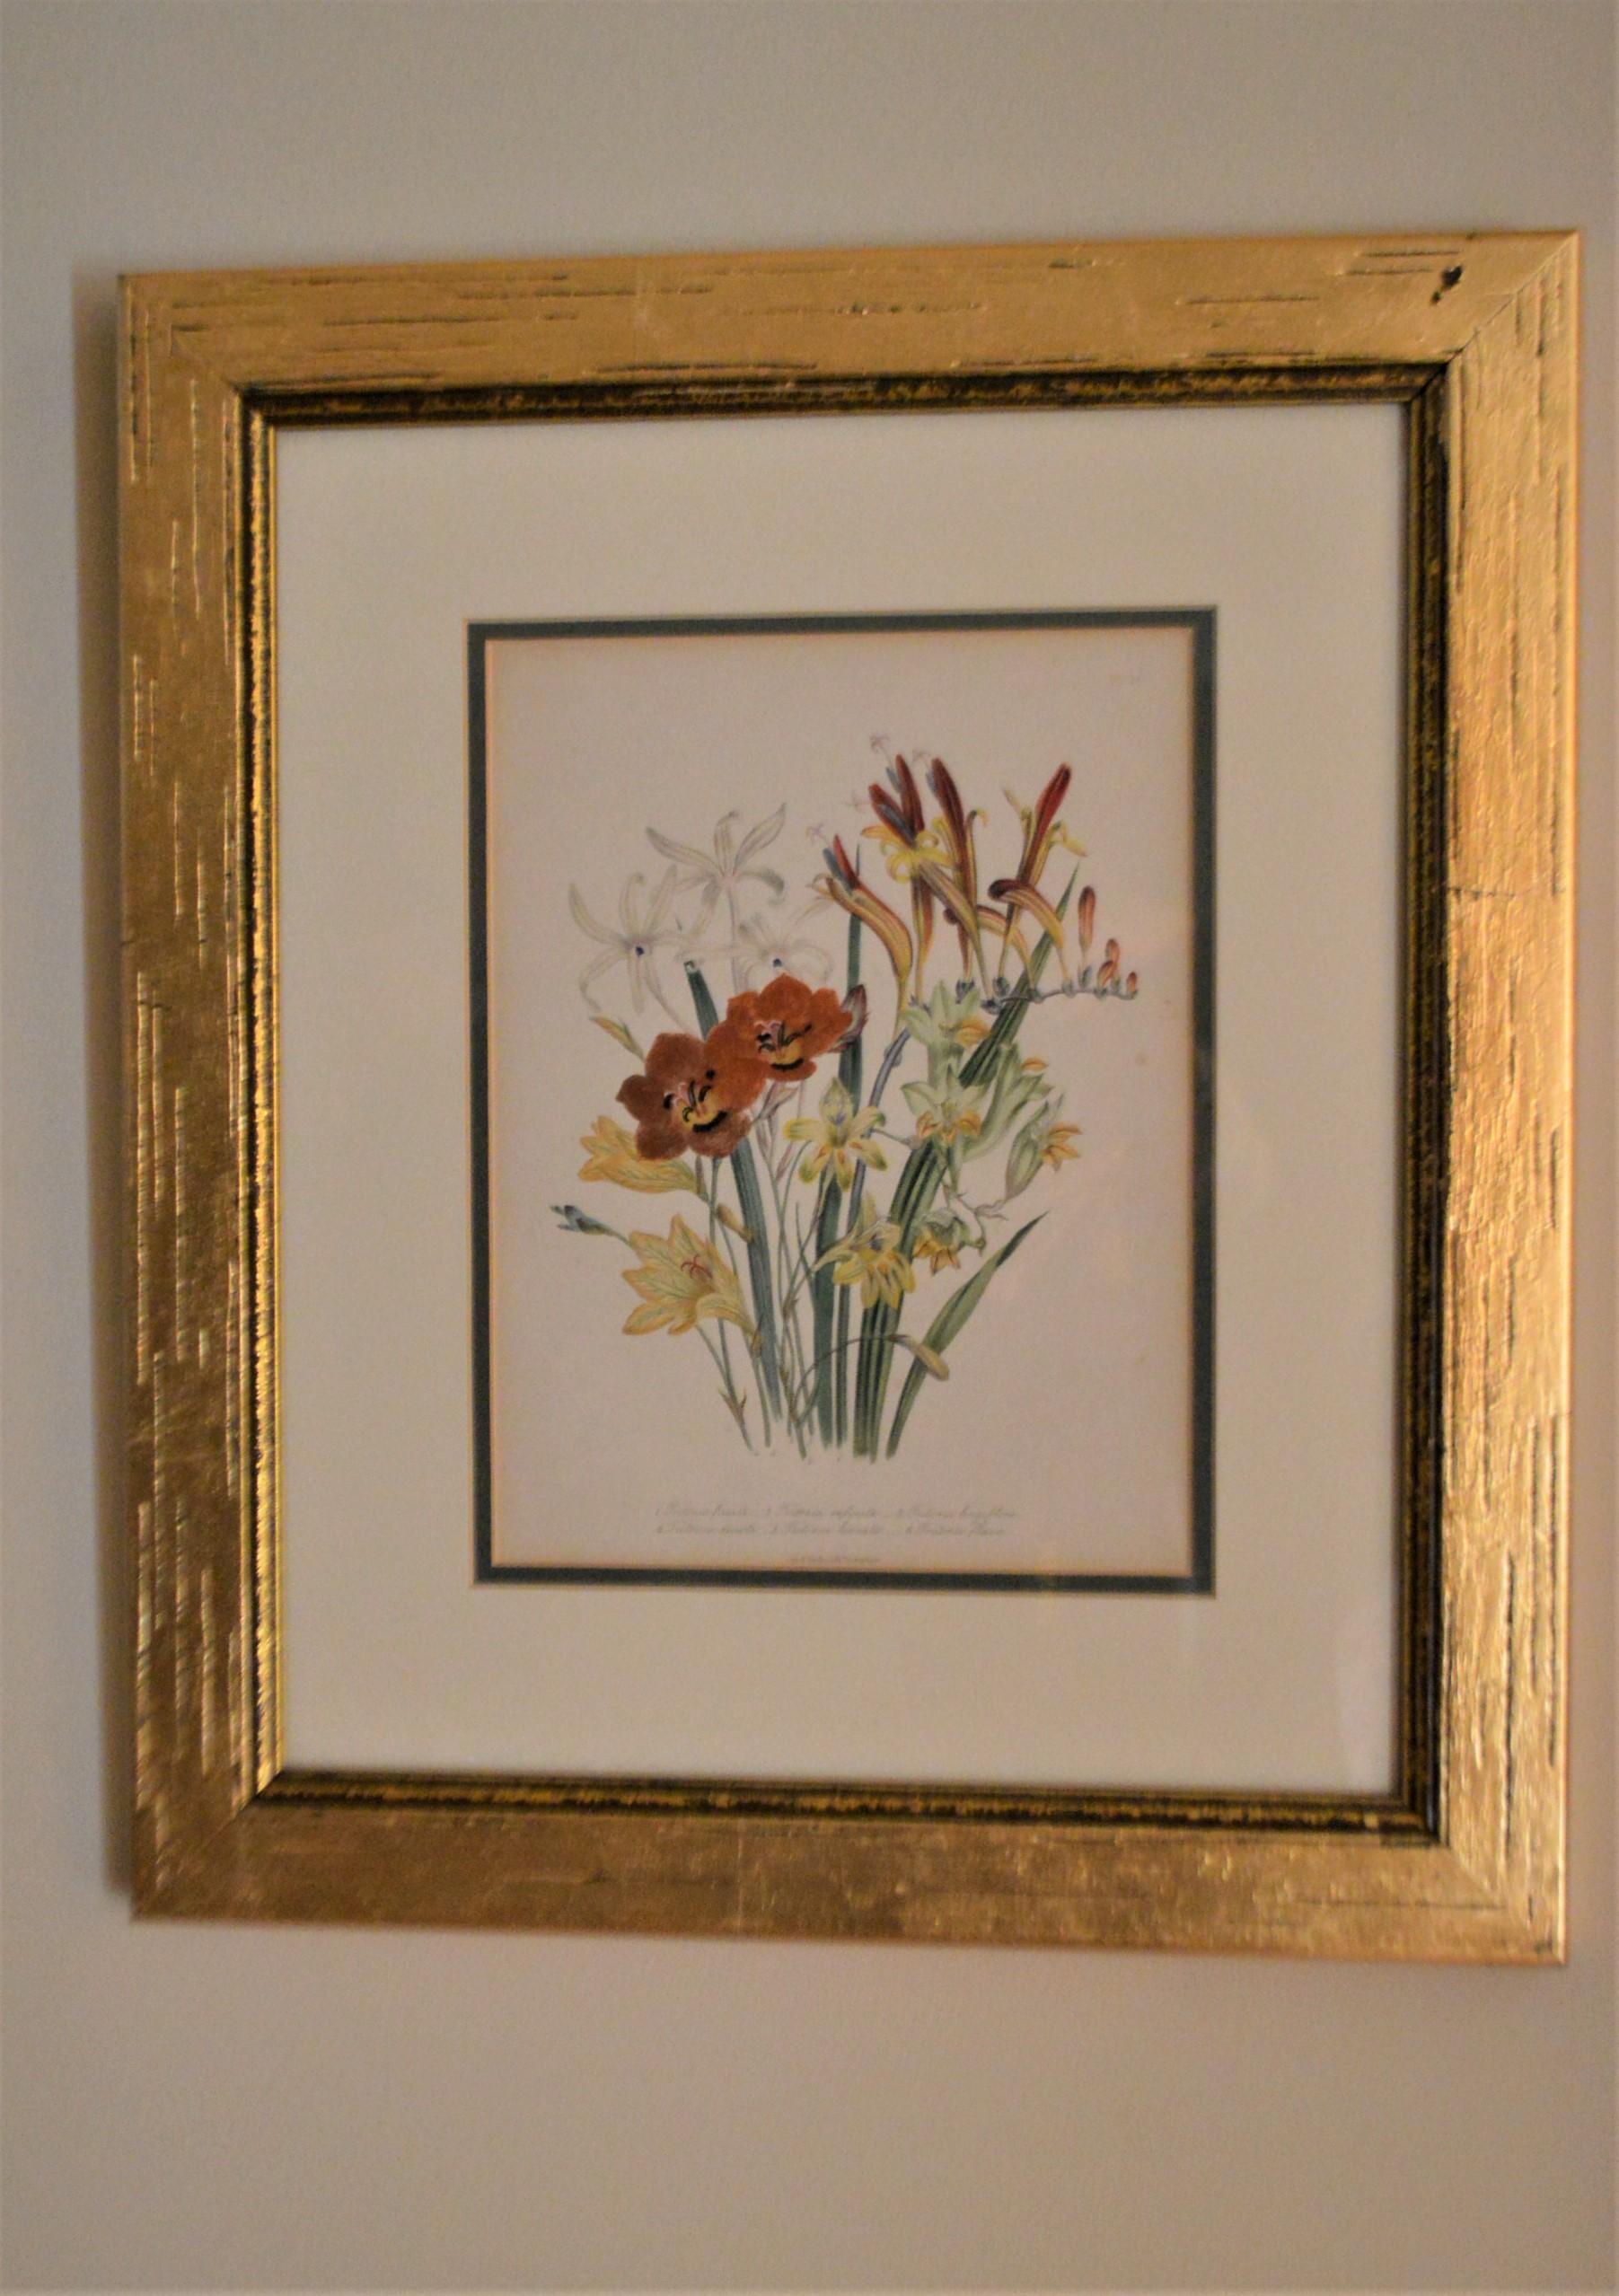 Set of four floral botanical hand painted lithographs from London England, dated 1846, by artist Jane W. Londer.
They have been nicely framed in a leaf gilded wooden frame.
The exterior dimensions are w 15